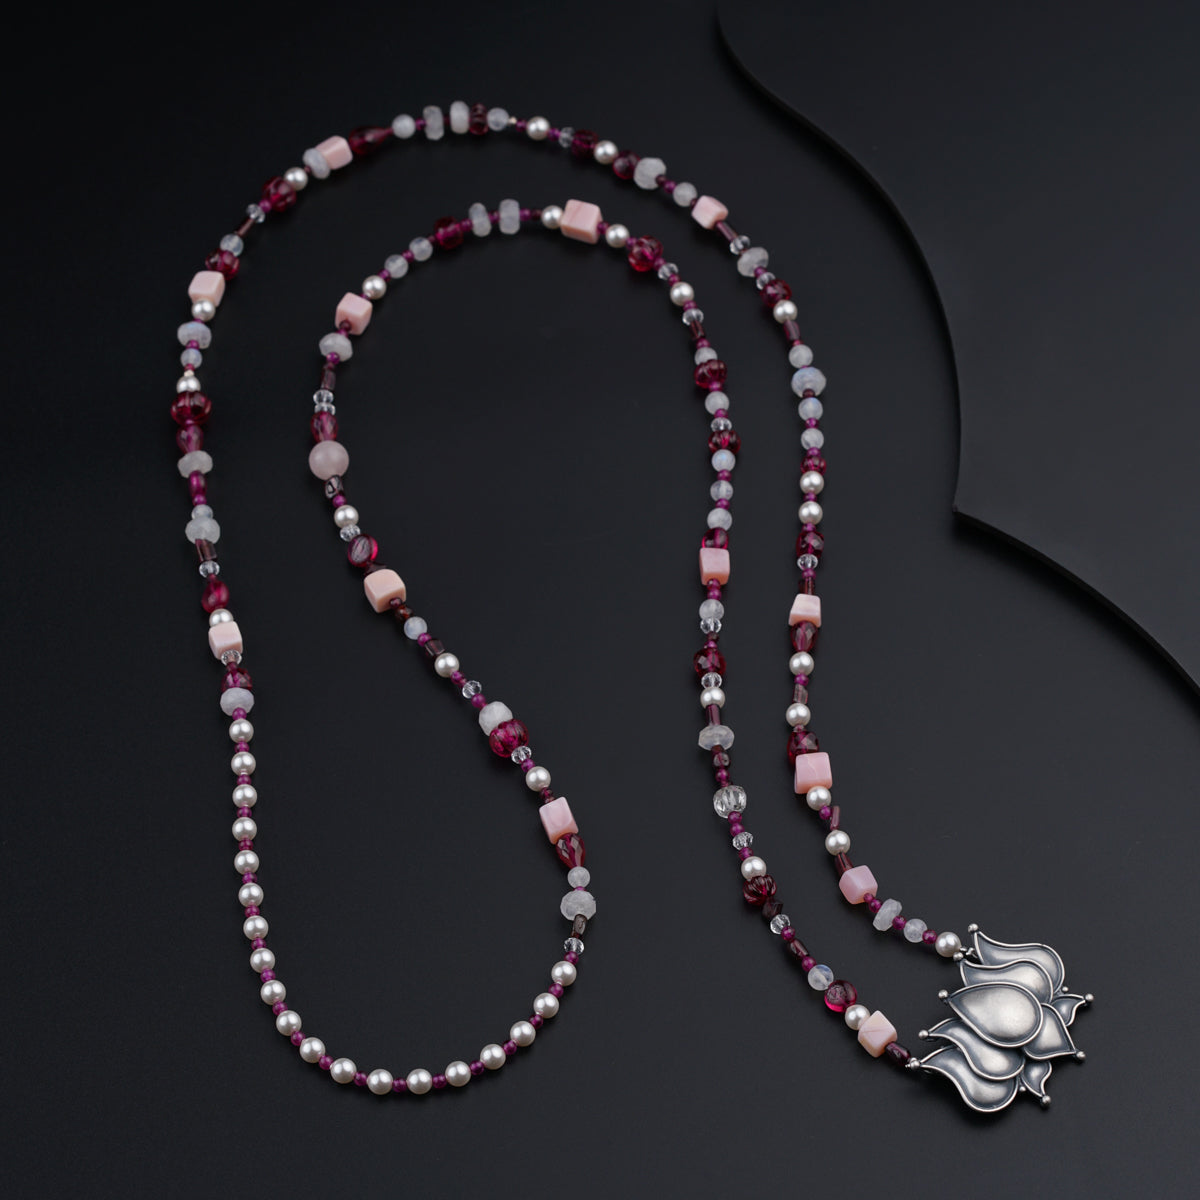 a long beaded necklace with a silver pendant